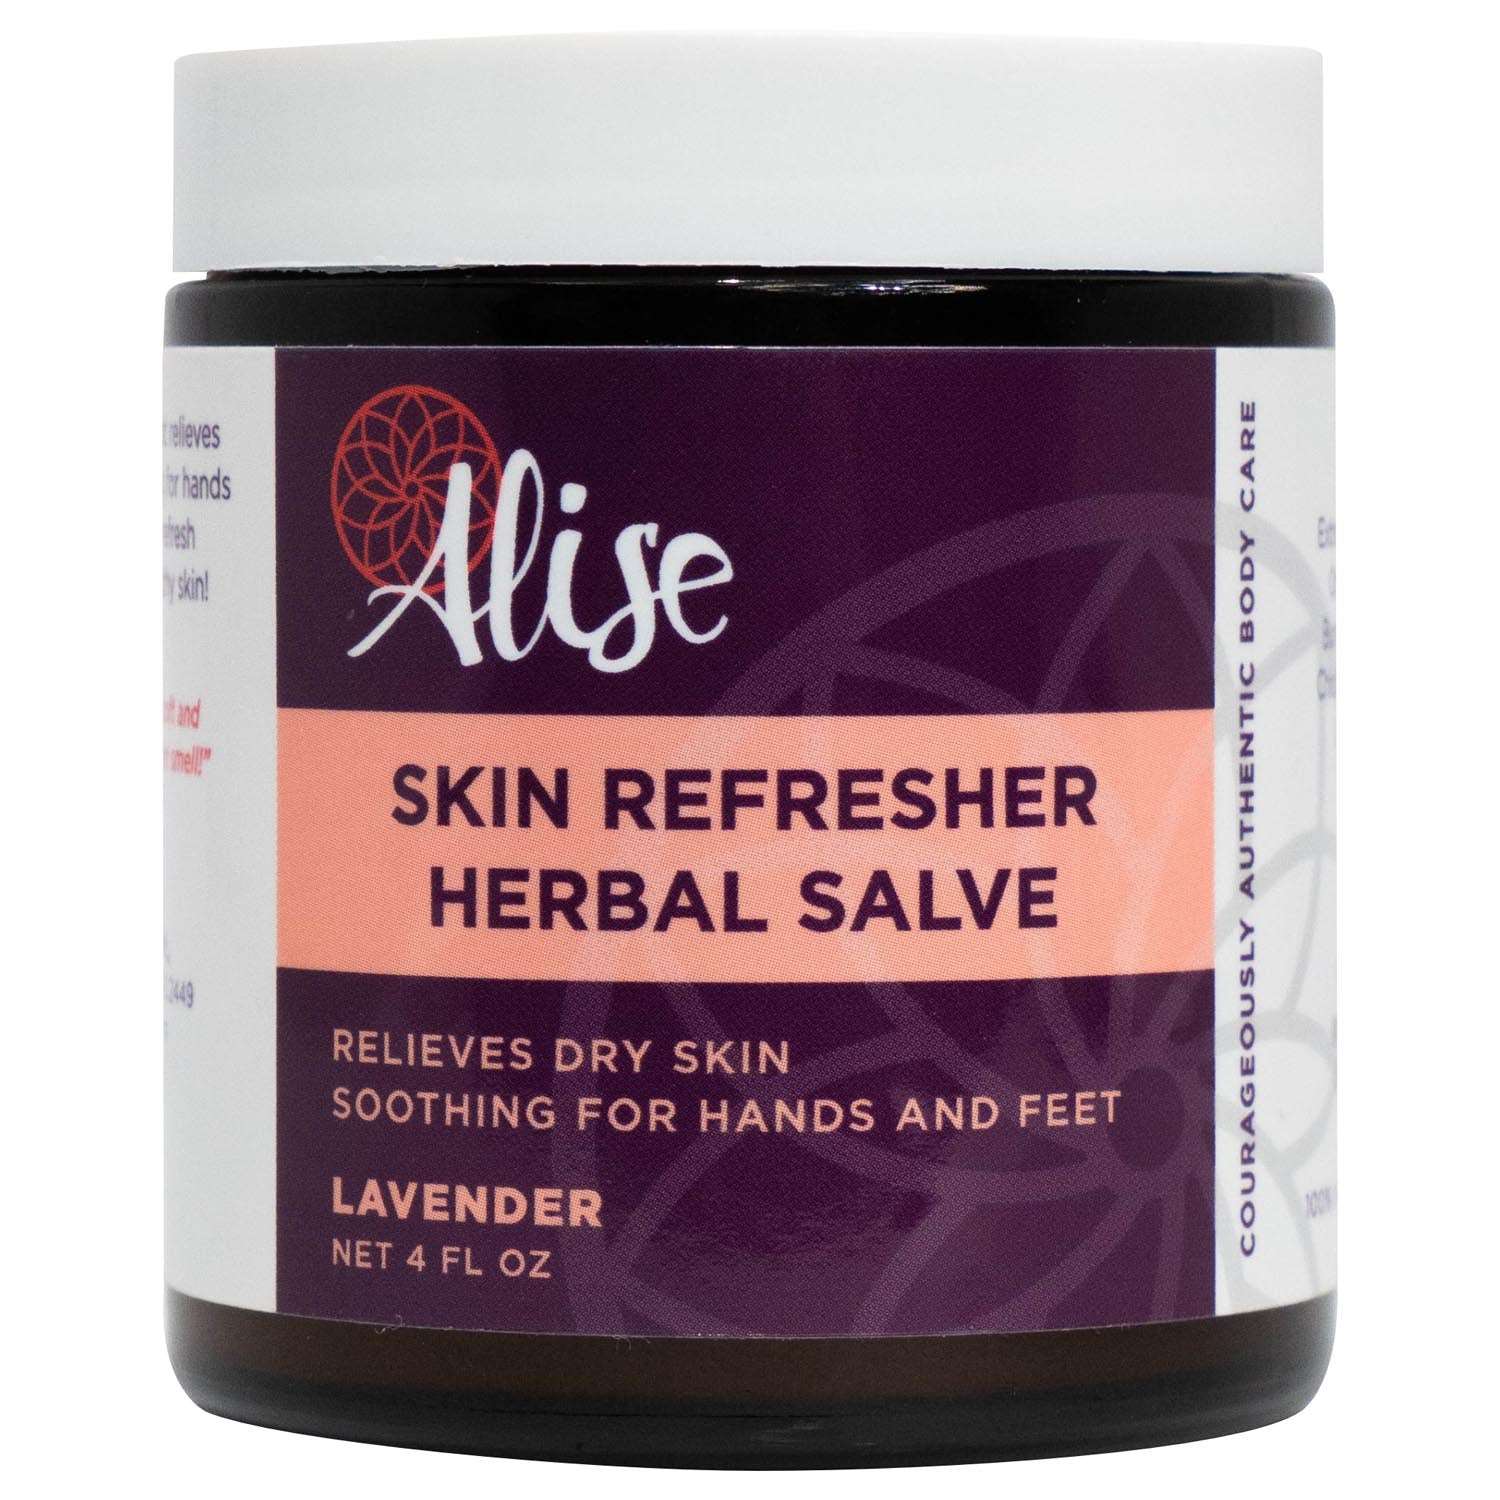 Lavender Lovers Gift Set with Skin Refresher handcrafted by Alise Body Care